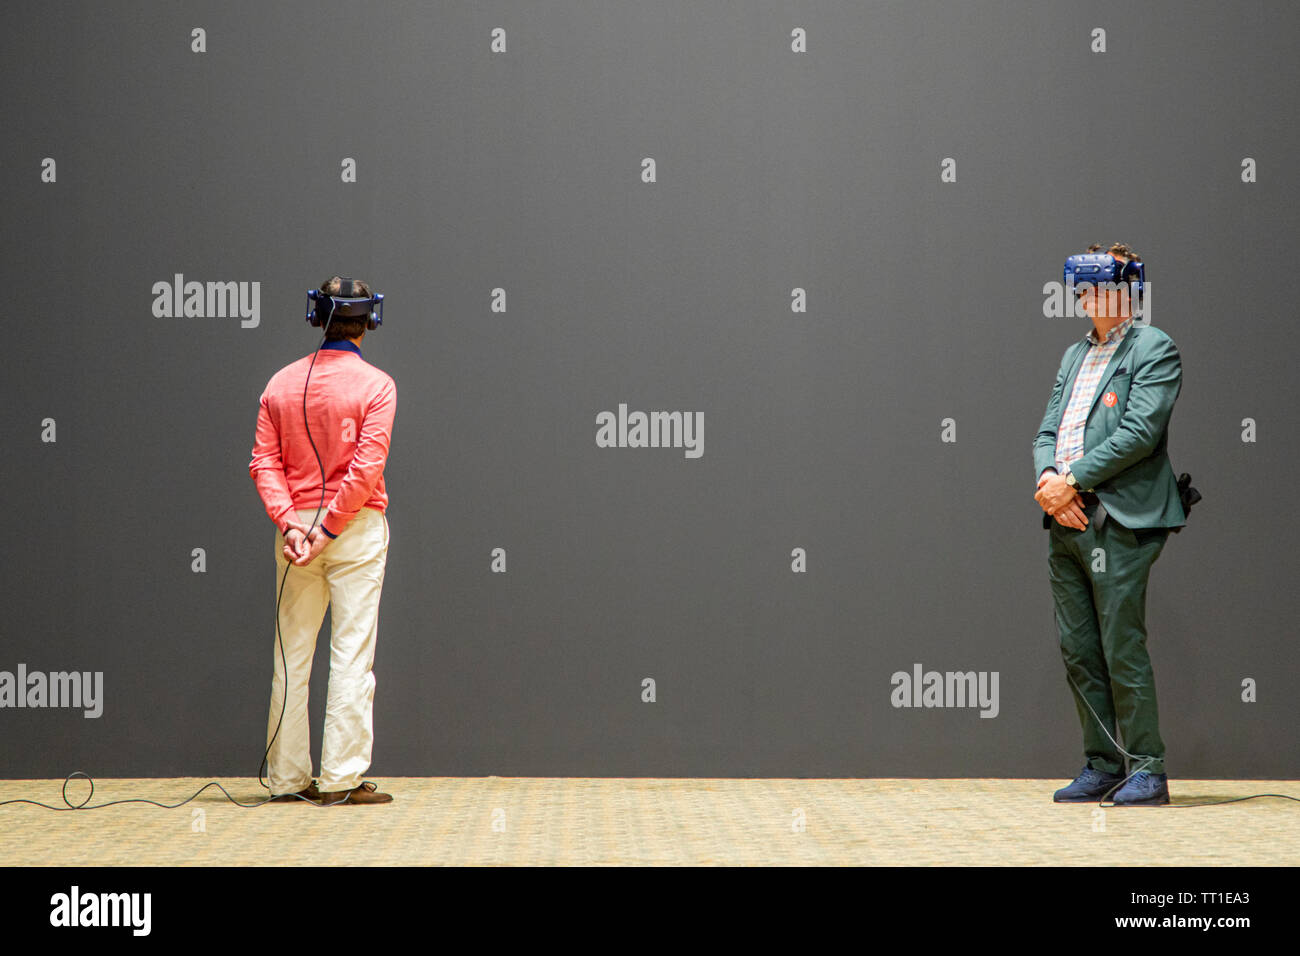 People lining up to watch the VR installation 'Coach Stage experiment' by artist Paul McCarthy at the 49th annual Art Basel art fair in Basel. Stock Photo